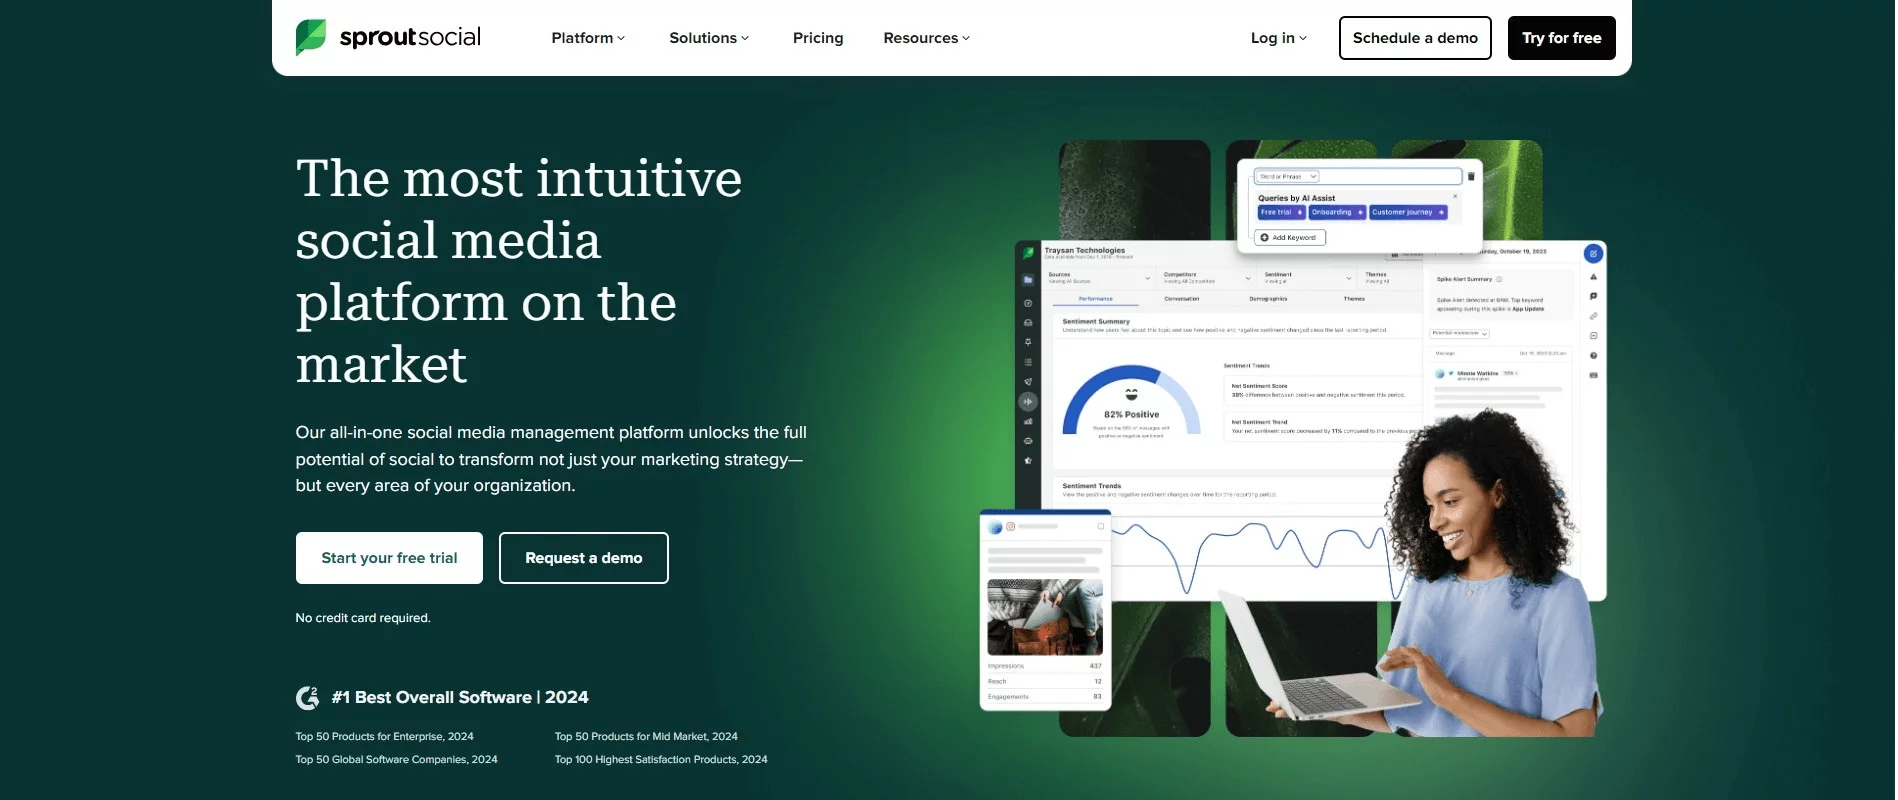 Sprout Social homepage promoting its intuitive social media management platform, featuring analytics and user-friendly interface with options for free trial and demo.